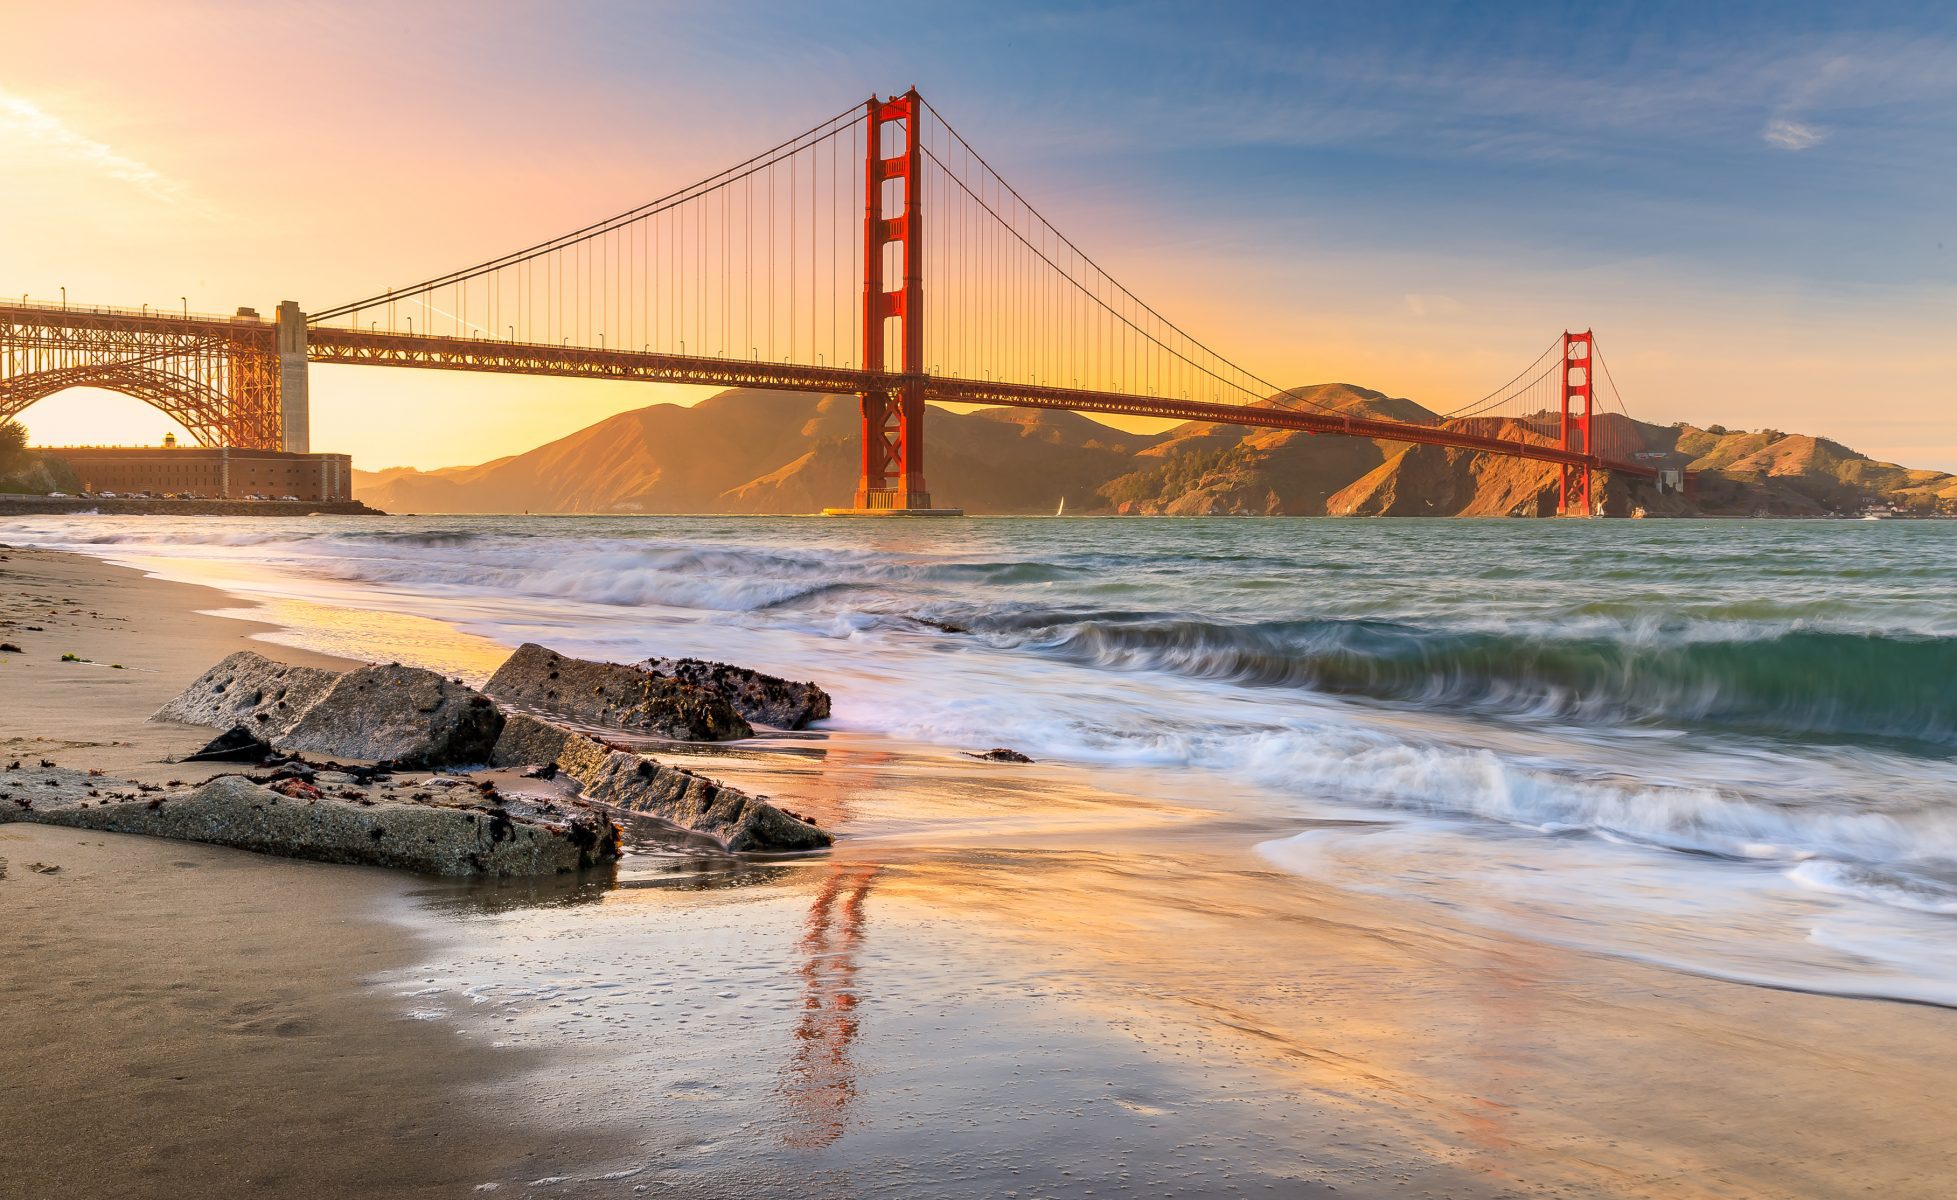 The Golden Gate Bridge at sunset. Our San Rafael wrongful termination attorney is dedicated to providing professional legal representation to the San Francisco Area.